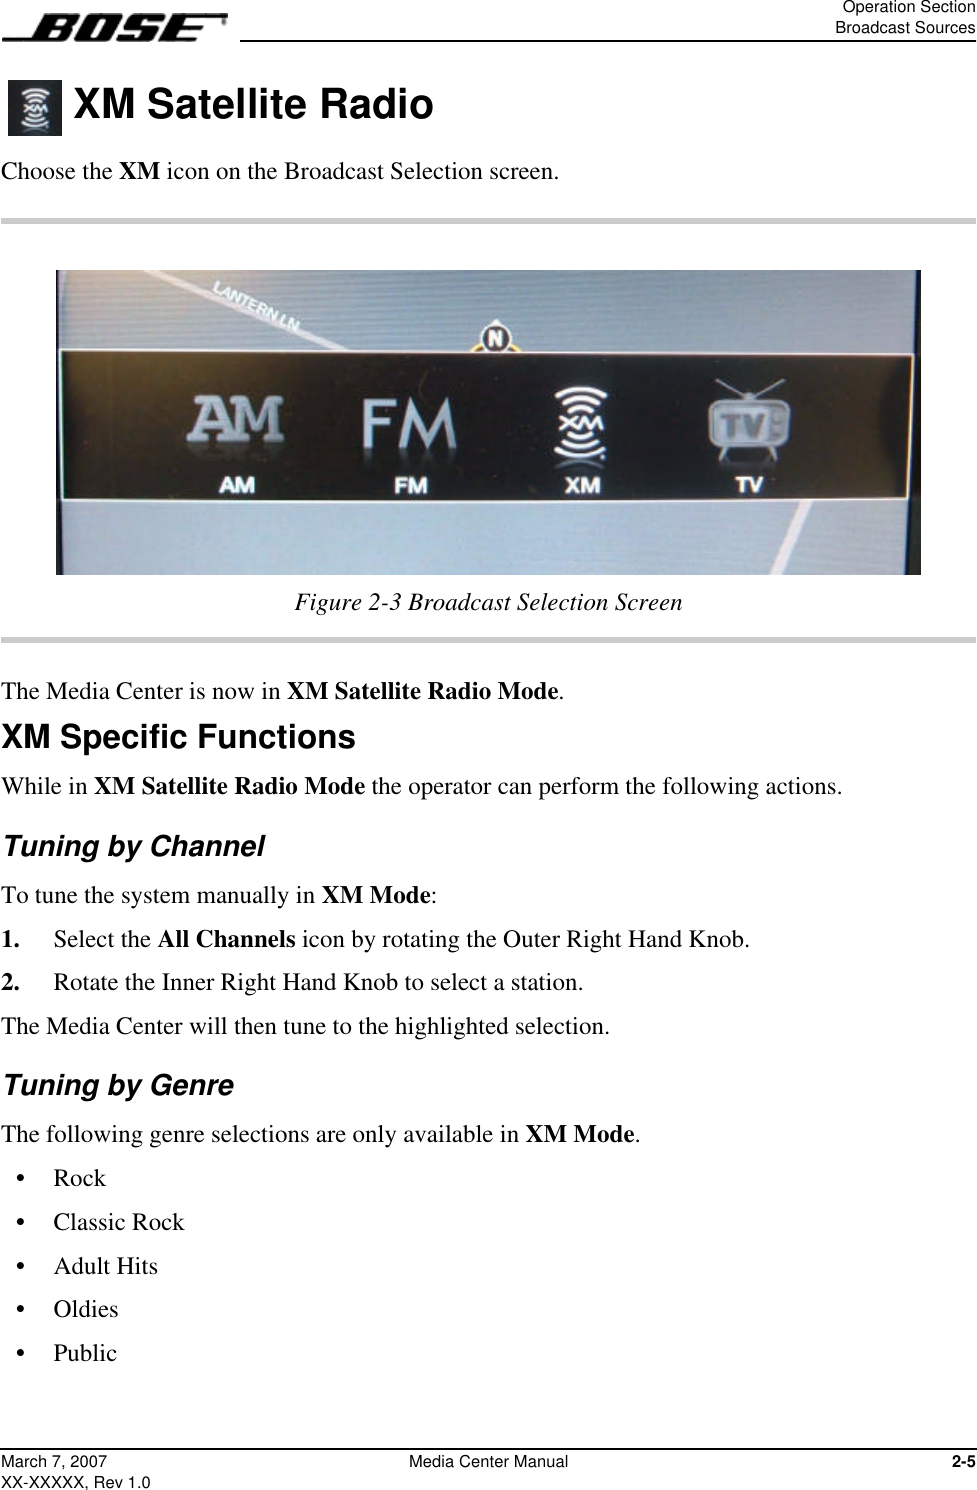 Operation SectionBroadcast Sources2-5March 7, 2007XX-XXXXX, Rev 1.0Media Center Manual XM Satellite RadioChoose the XM icon on the Broadcast Selection screen.Figure 2-3 Broadcast Selection ScreenThe Media Center is now in XM Satellite Radio Mode.XM Specific FunctionsWhile in XM Satellite Radio Mode the operator can perform the following actions.Tuning by ChannelTo tune the system manually in XM Mode:1.  Select the All Channels icon by rotating the Outer Right Hand Knob.2.  Rotate the Inner Right Hand Knob to select a station.The Media Center will then tune to the highlighted selection.Tuning by GenreThe following genre selections are only available in XM Mode.•  Rock•  Classic Rock•  Adult Hits•  Oldies•  Public